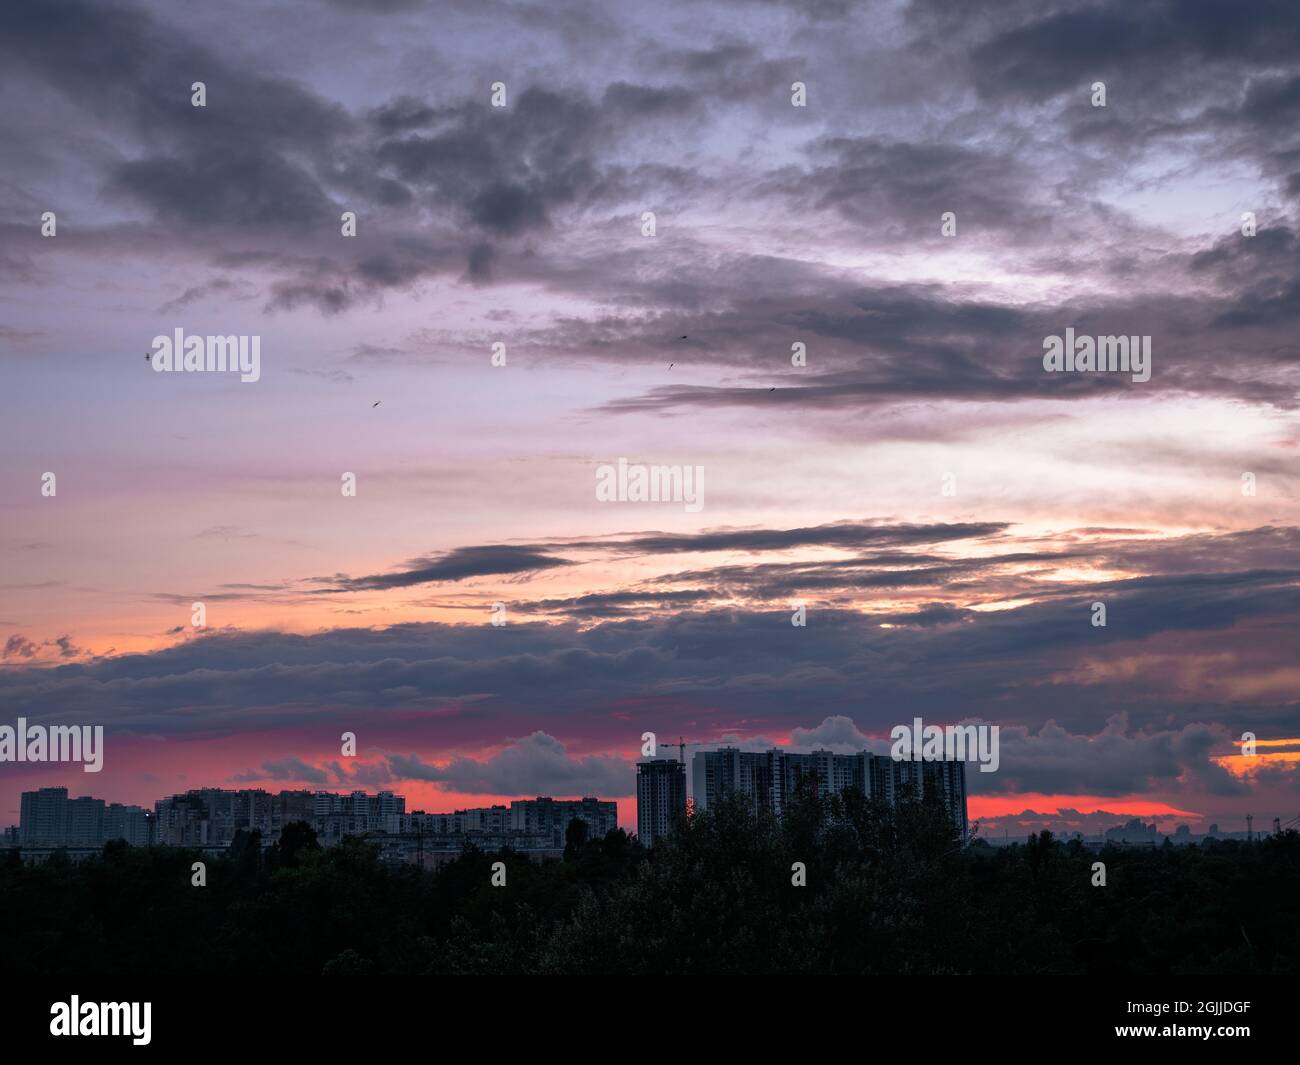 Colorful sunset over Kyiv (Kiev) city with buildings on the horizon. Industrial cityscape against backdrop of setting sun with red and lilac scenic. Stock Photo